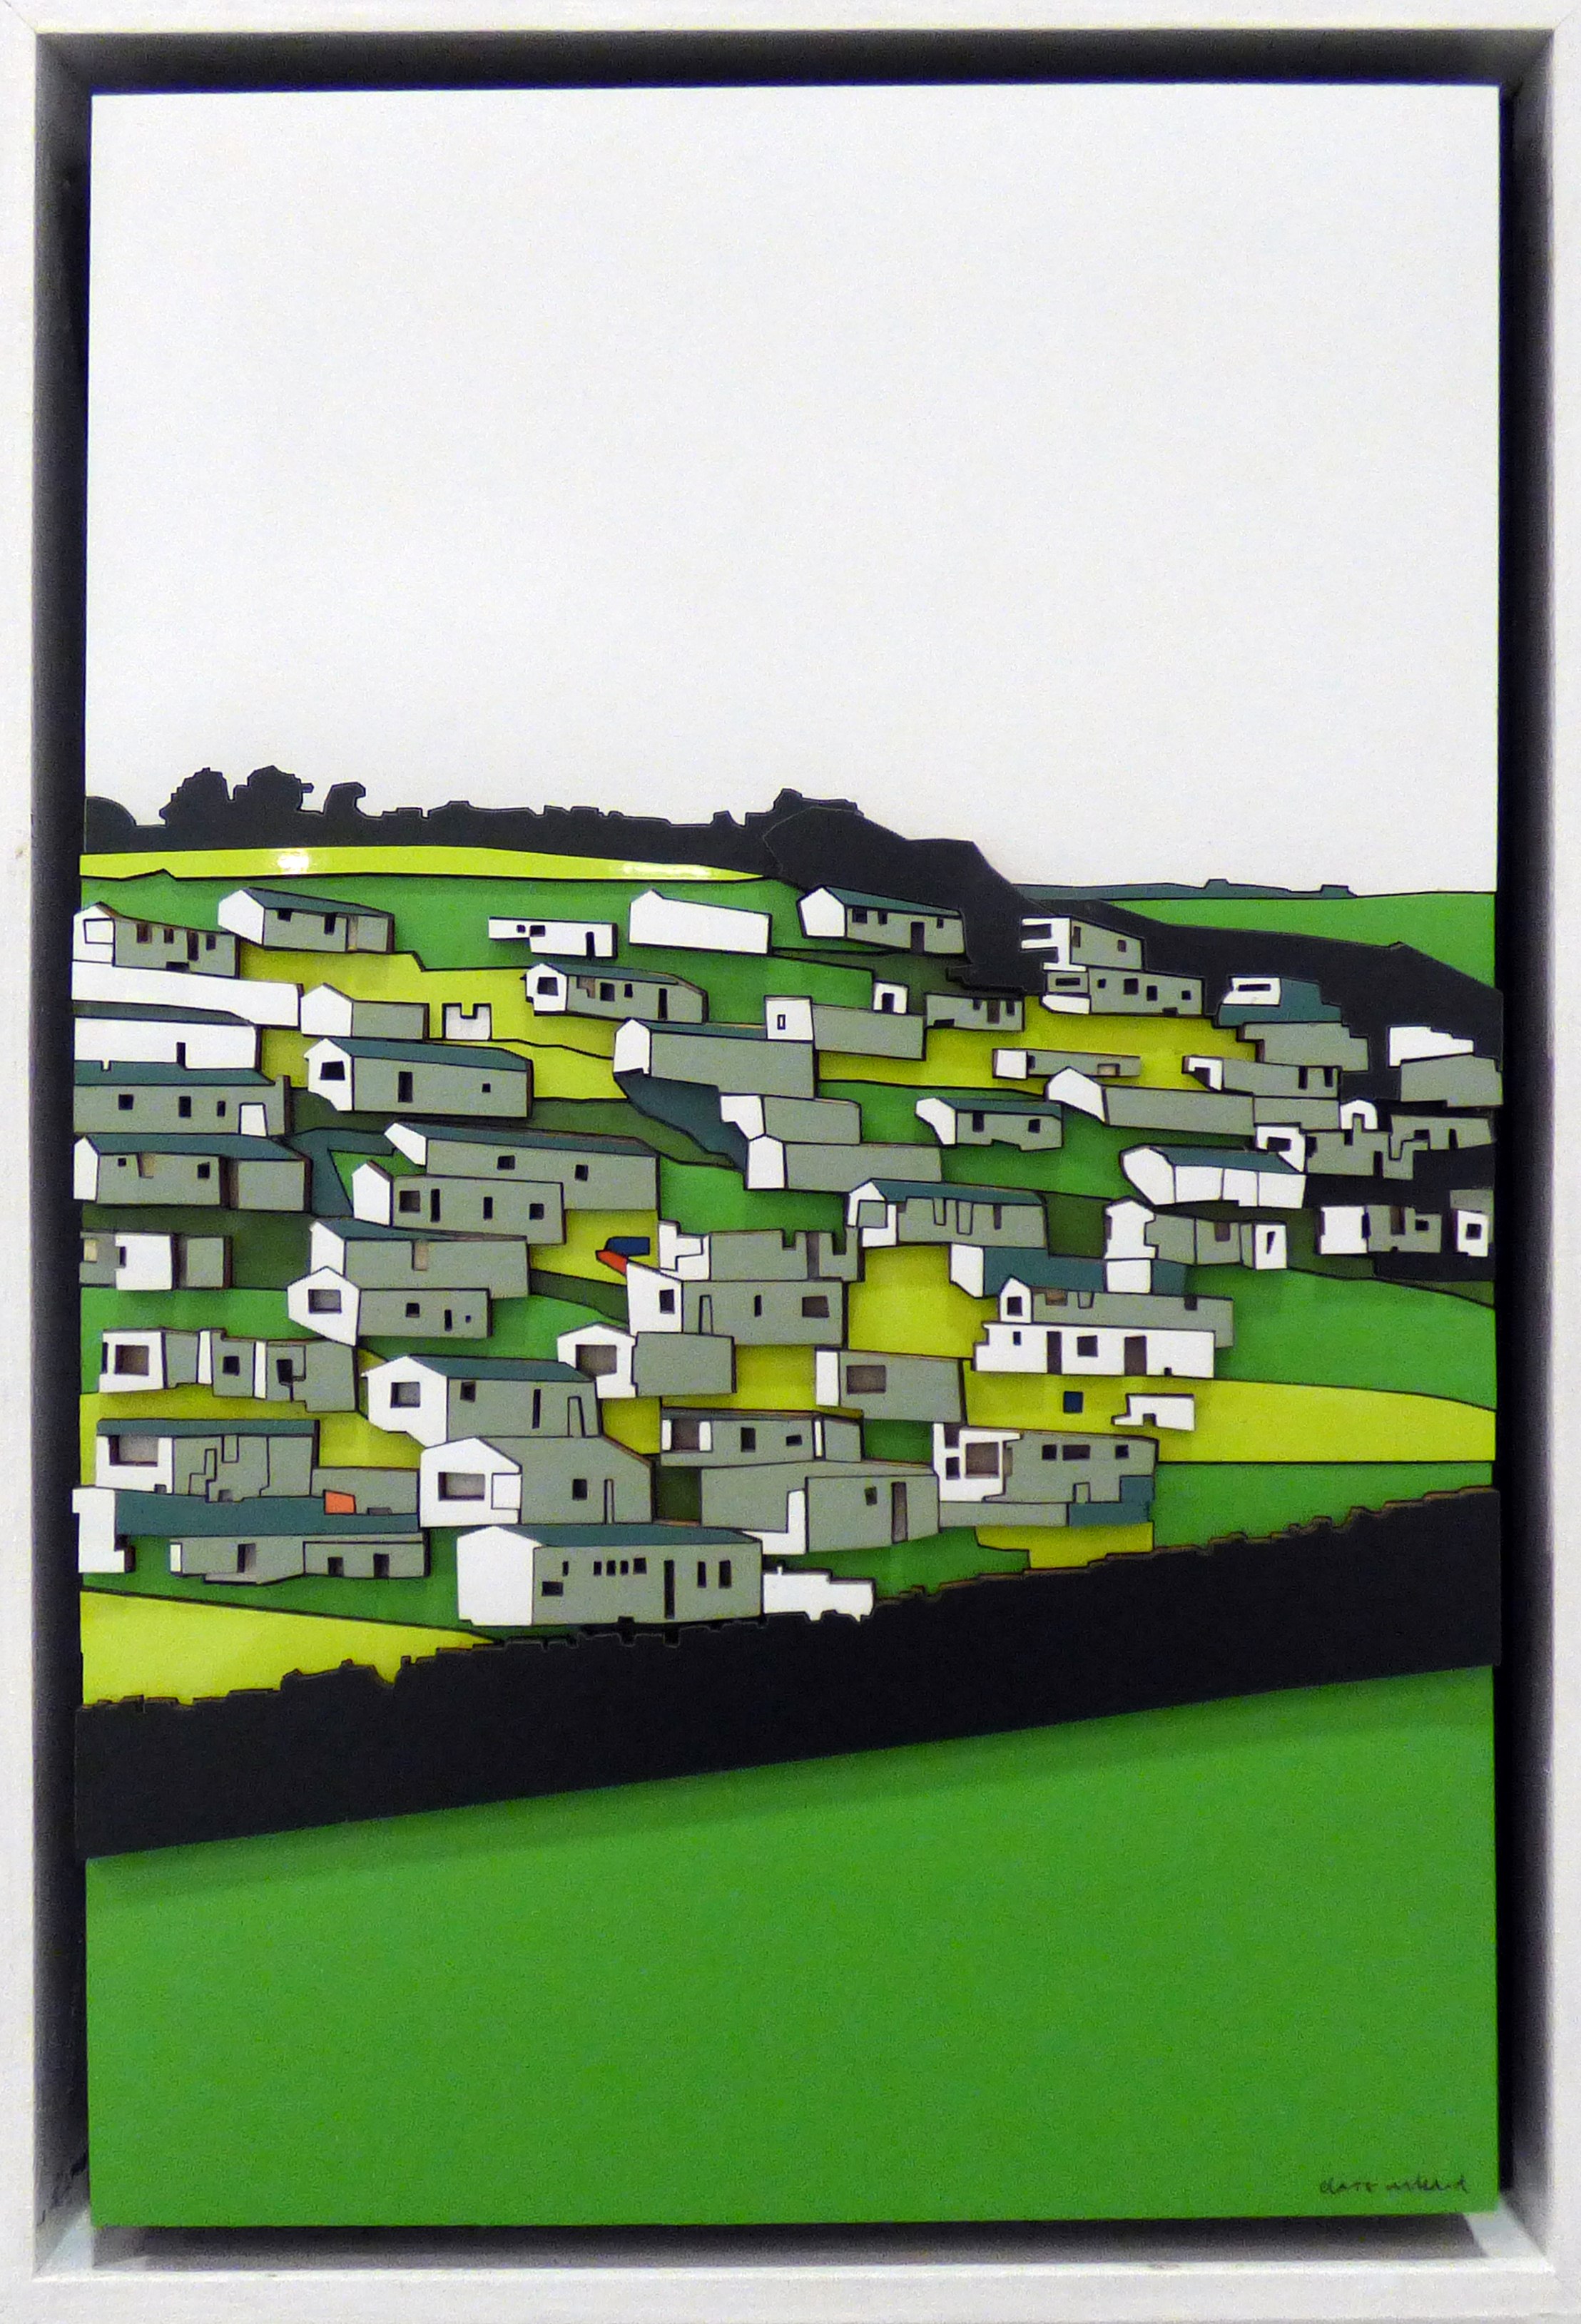 BEER HEAD, CARAVANS (DEVON) by Clare Willard, coloured laminate and wood, CRAFTED exhibition, Kirkby Gallery, 2016